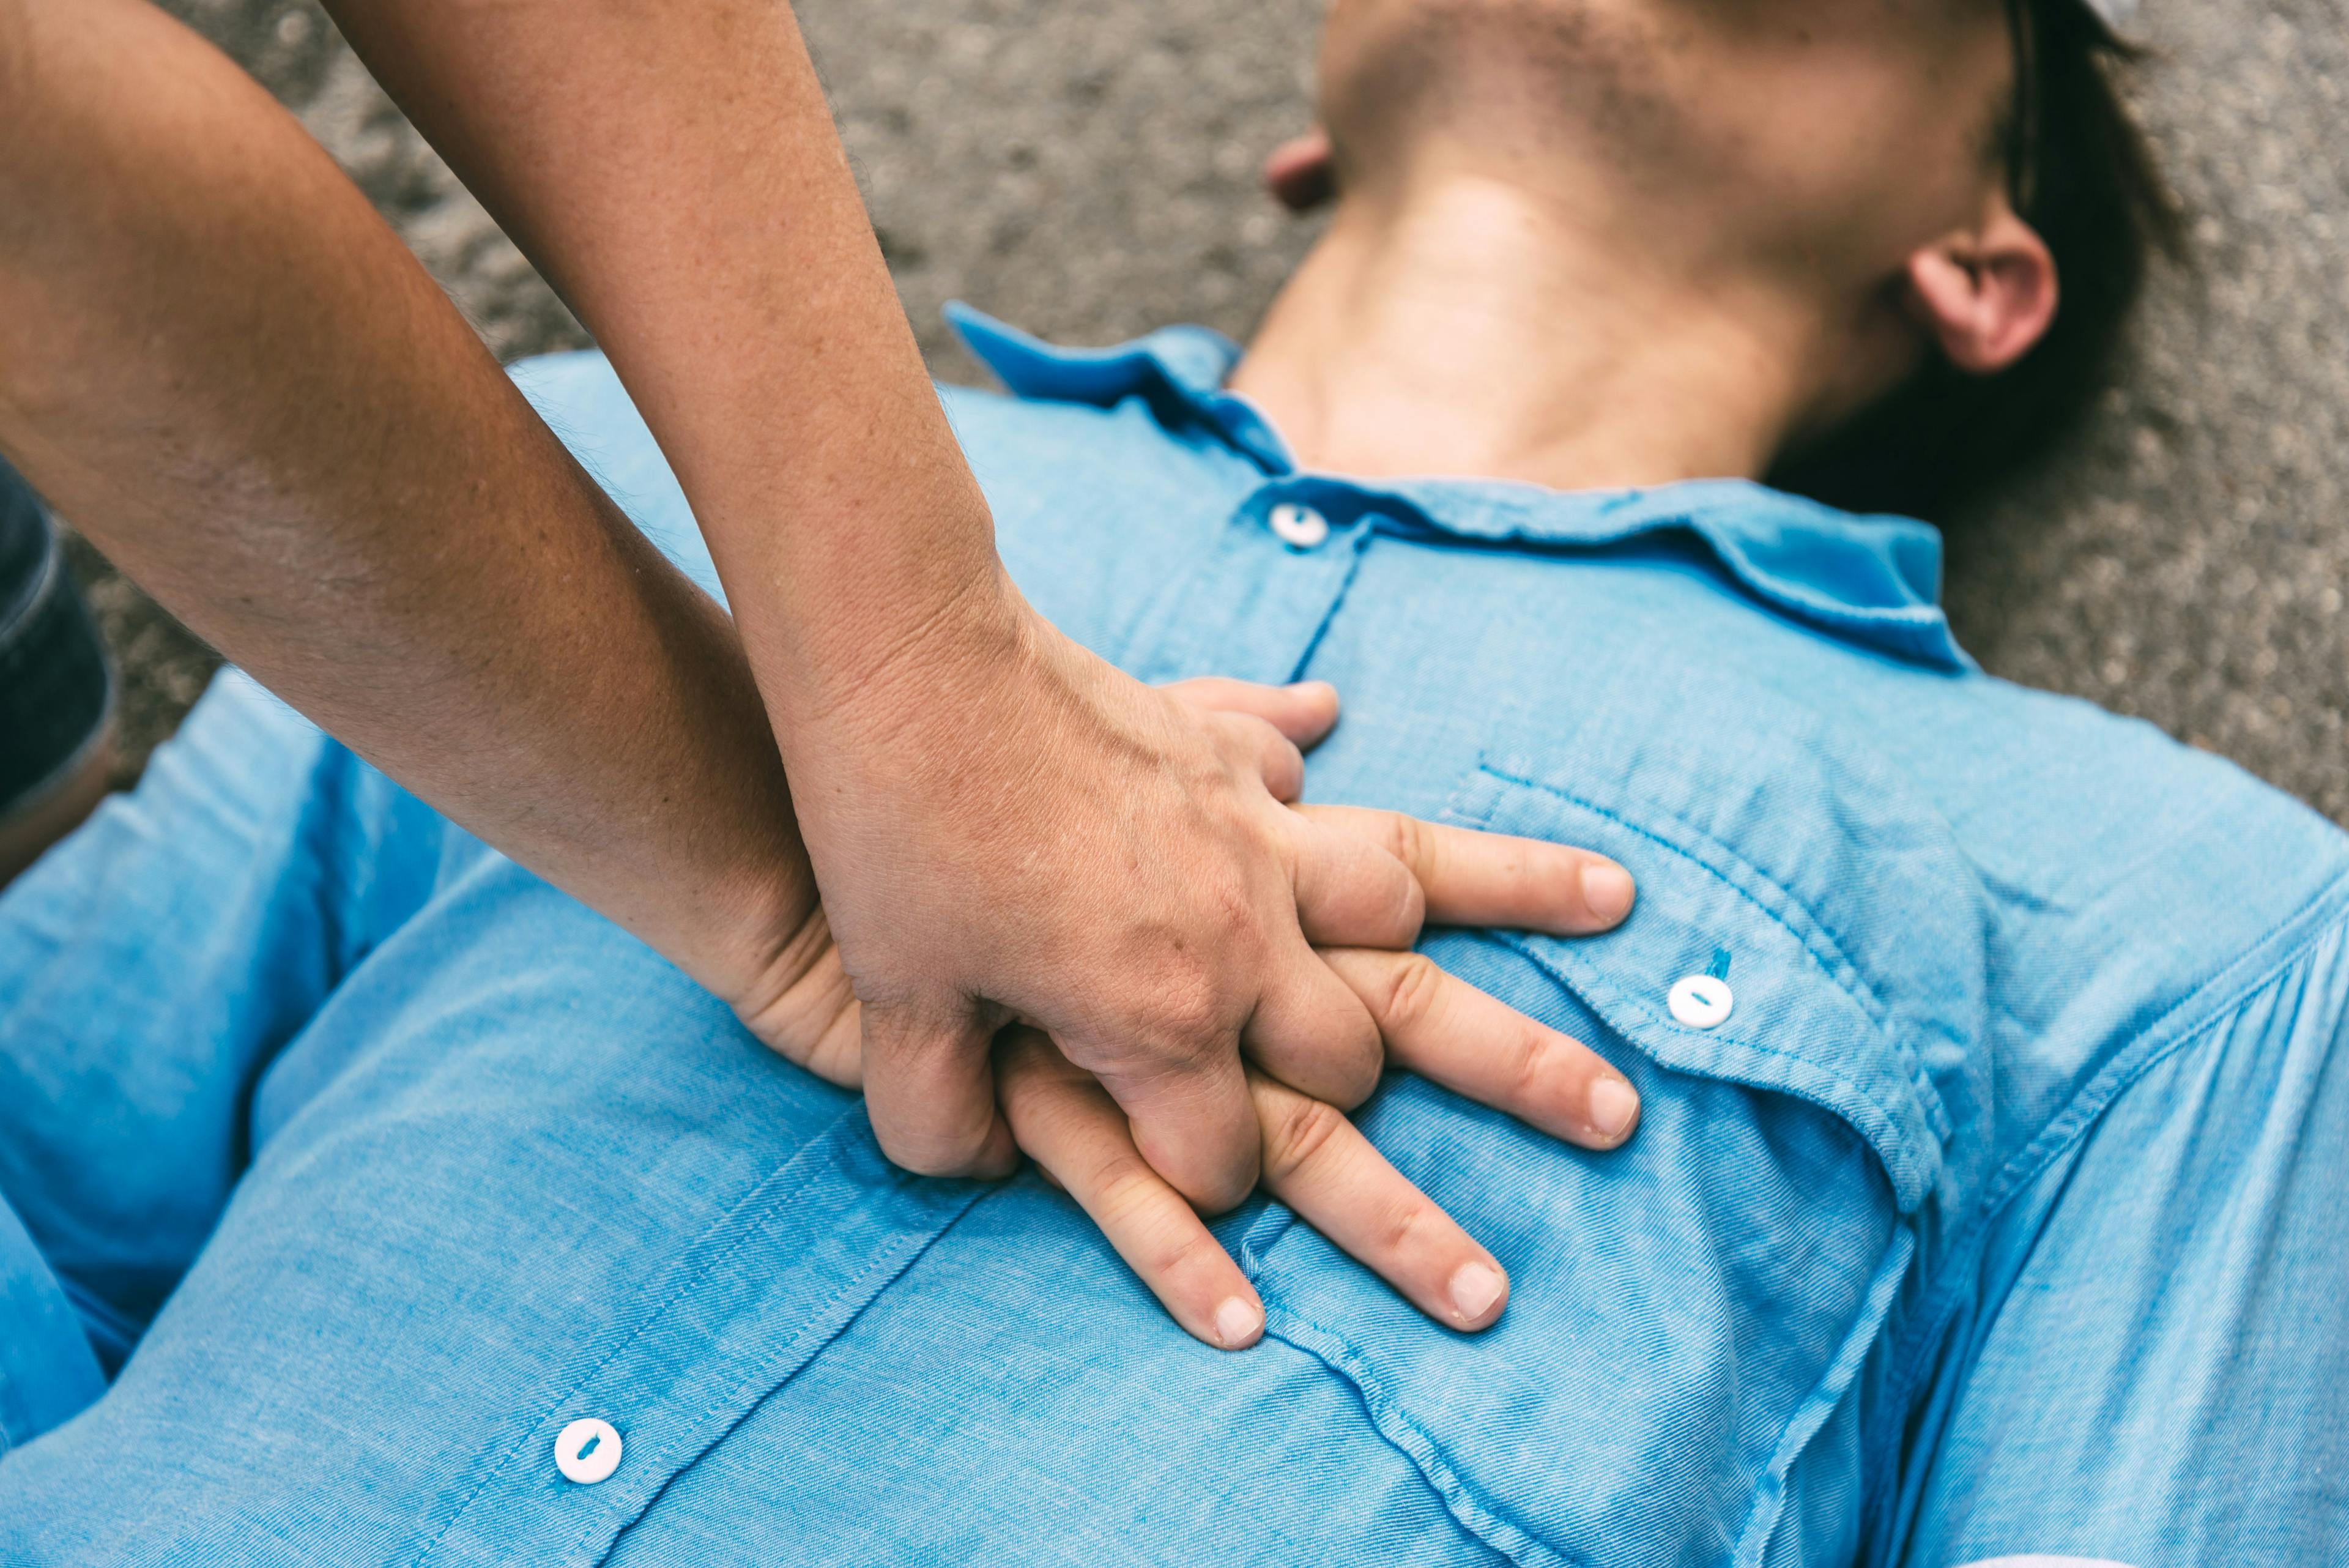 American Heart Month: Promoting CPR Training and Heart Health Awareness in Communities